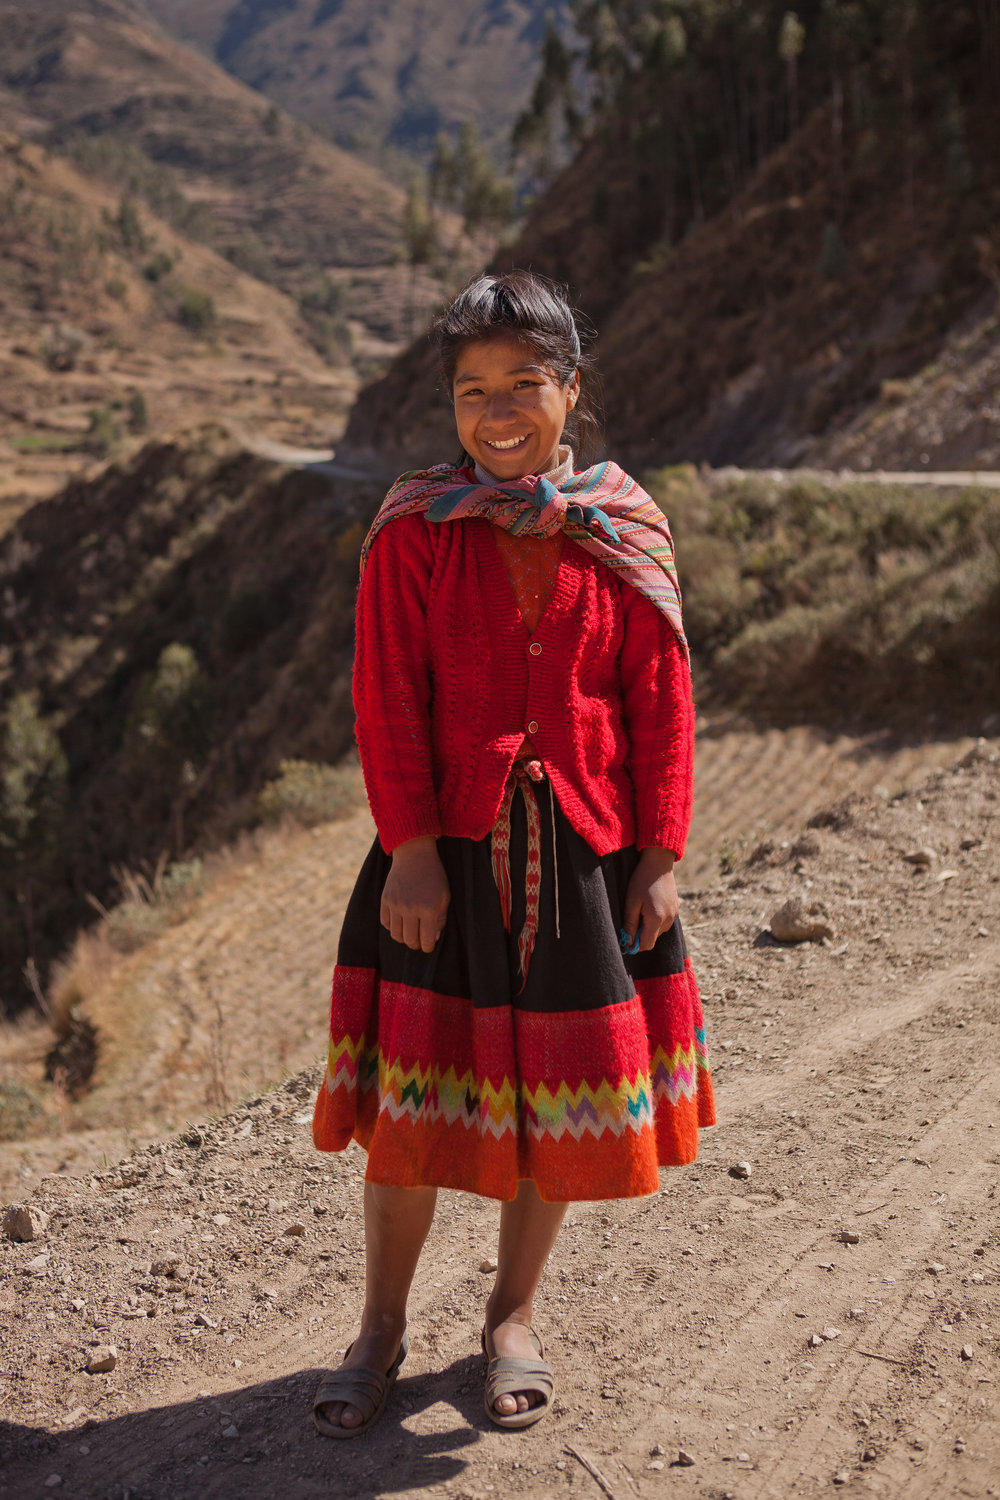  We ran into Elizabeth on her way back home from helping her mom at the market. Elizabeth lives in a rural mountain community, and she lives at the dorm during the week to make her commute to school possible. 